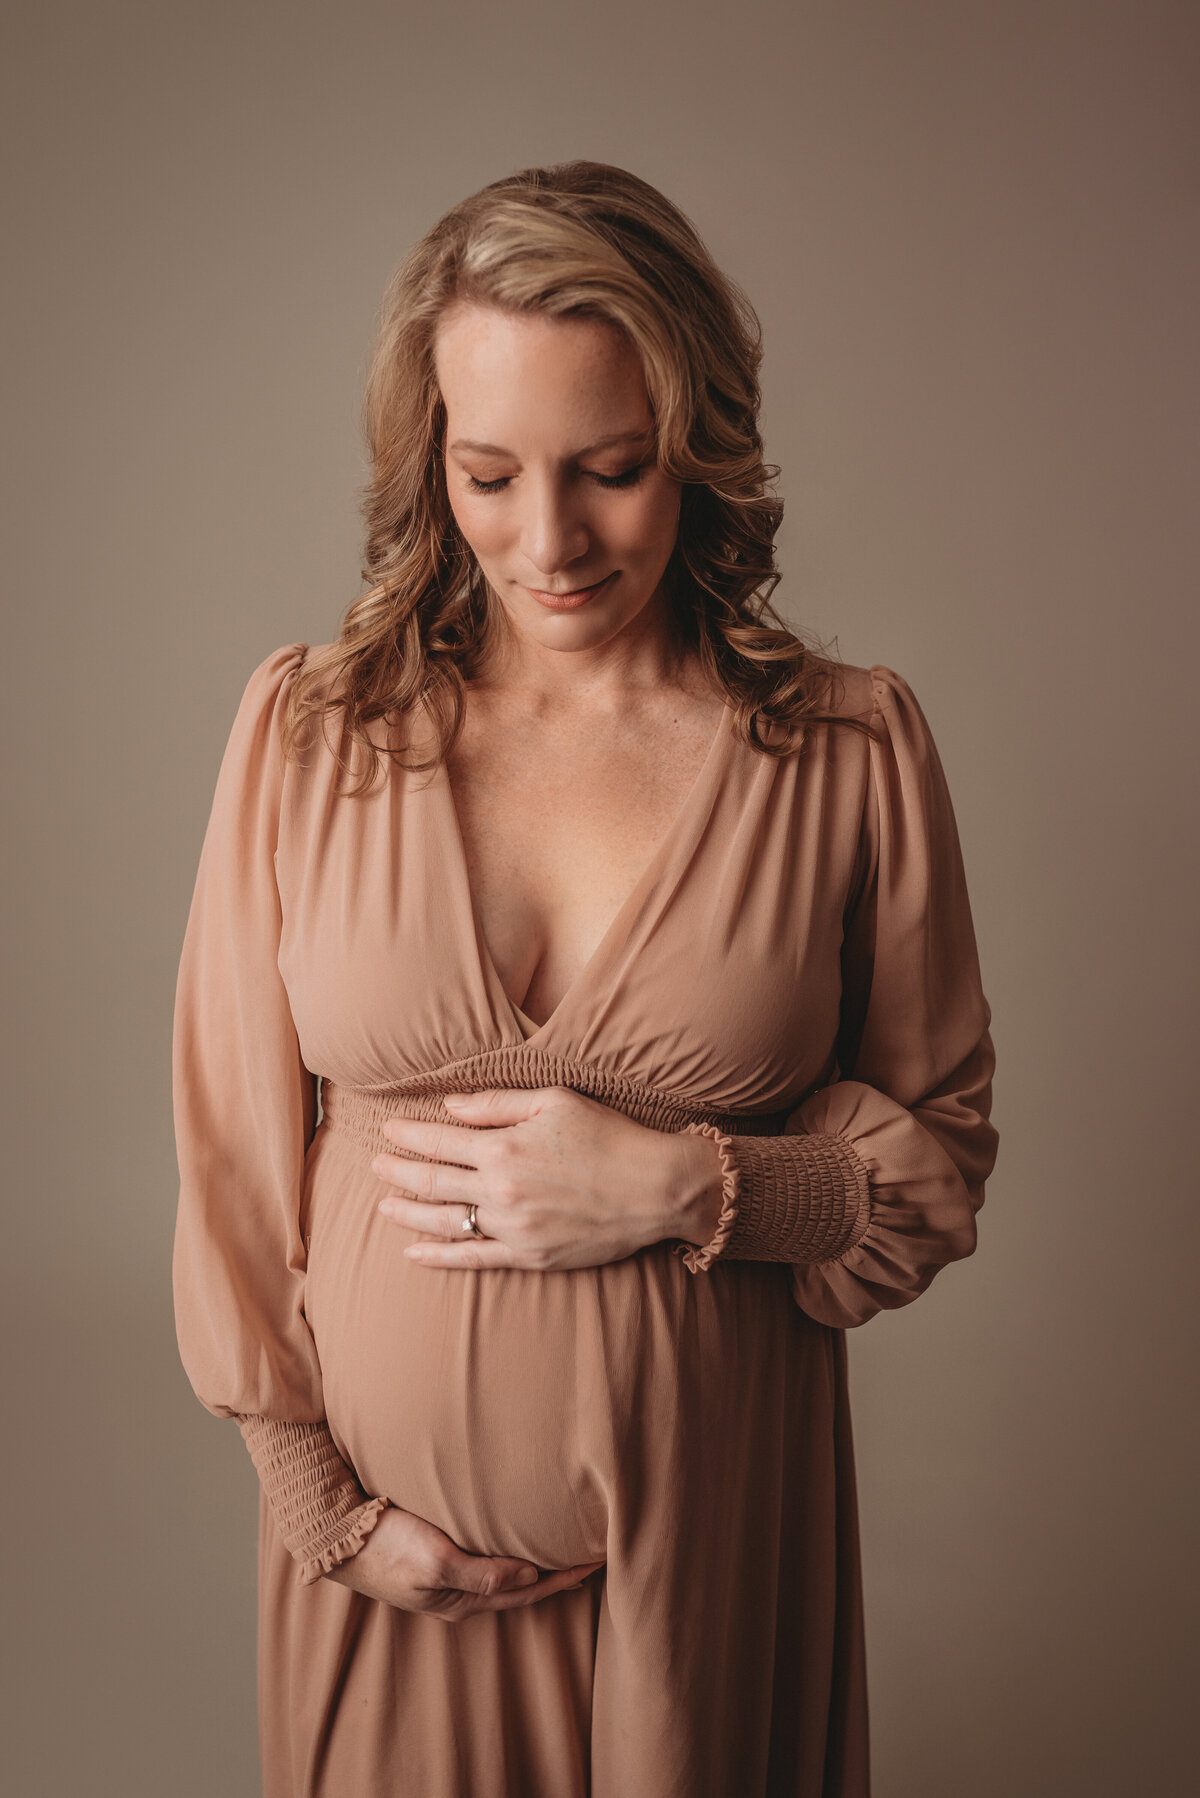 maternity photography marietta ga photo shoot for pregnant woman wearing light blush color dress holding baby bump with both hands looking at tummy posing on cream backdrop